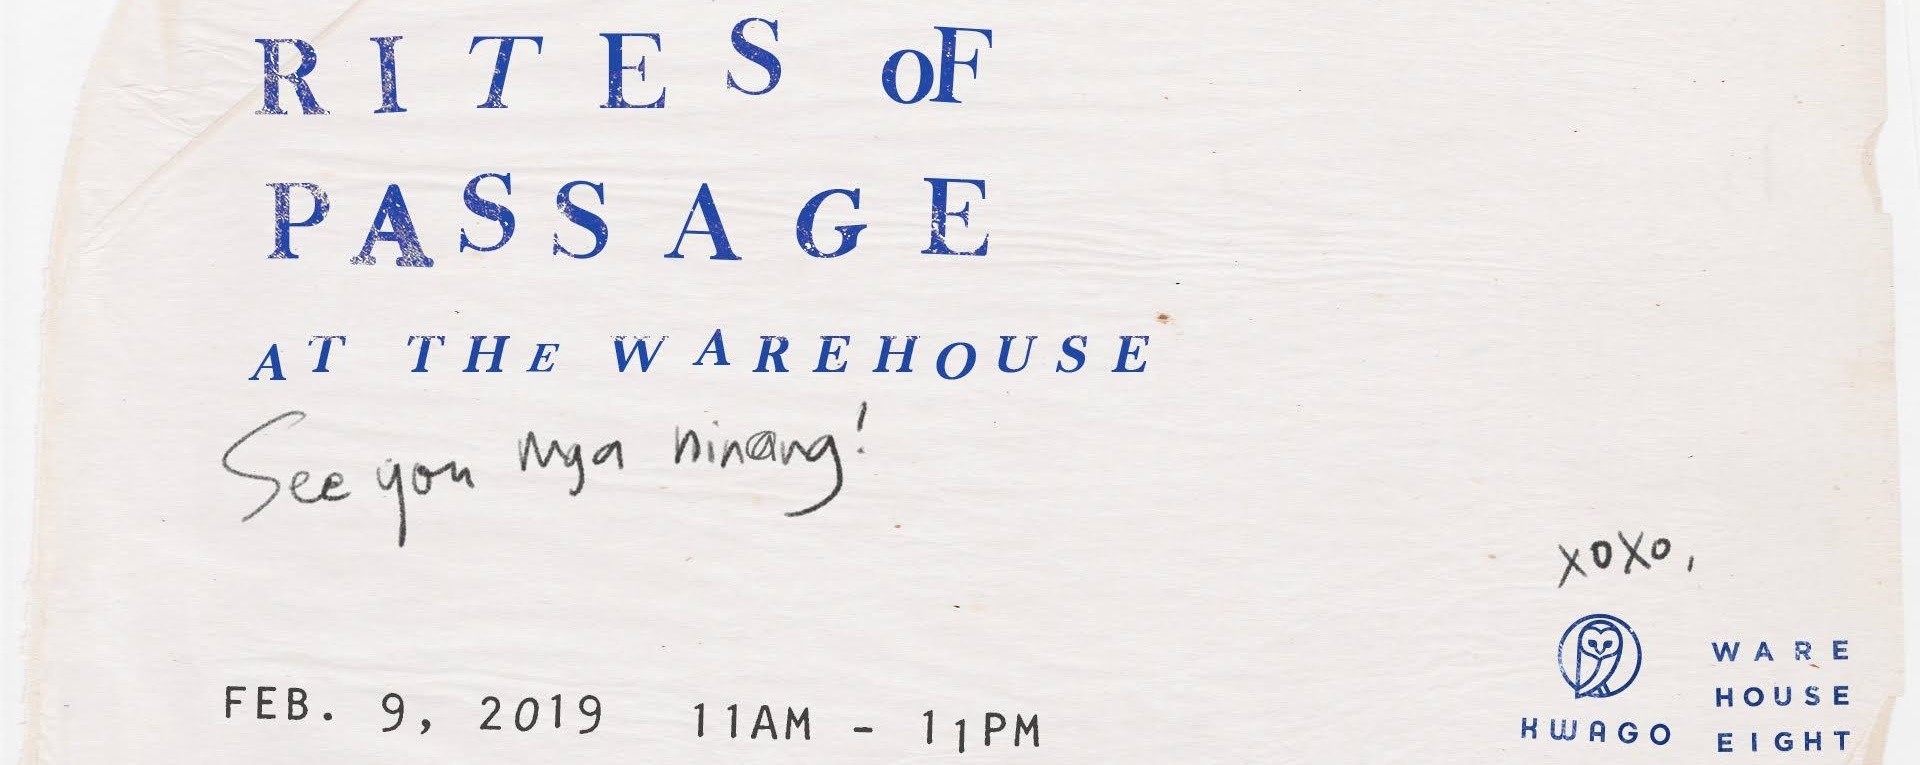 Rites of Passage at The Warehouse